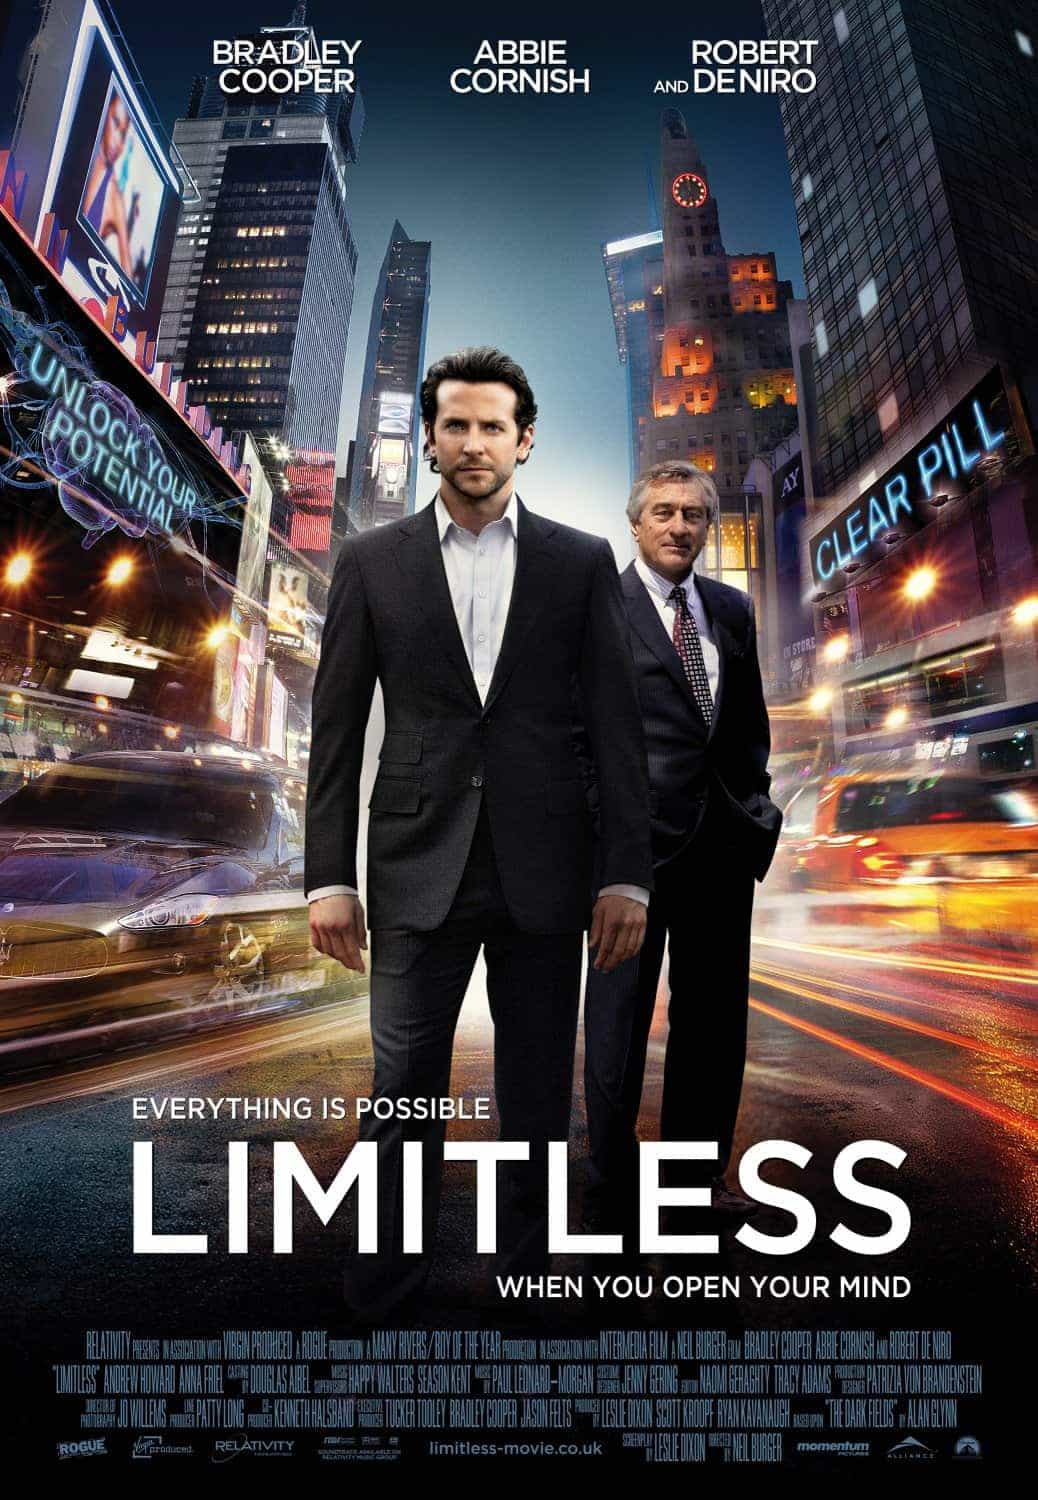 Limitless debuts at the top of the UK box office